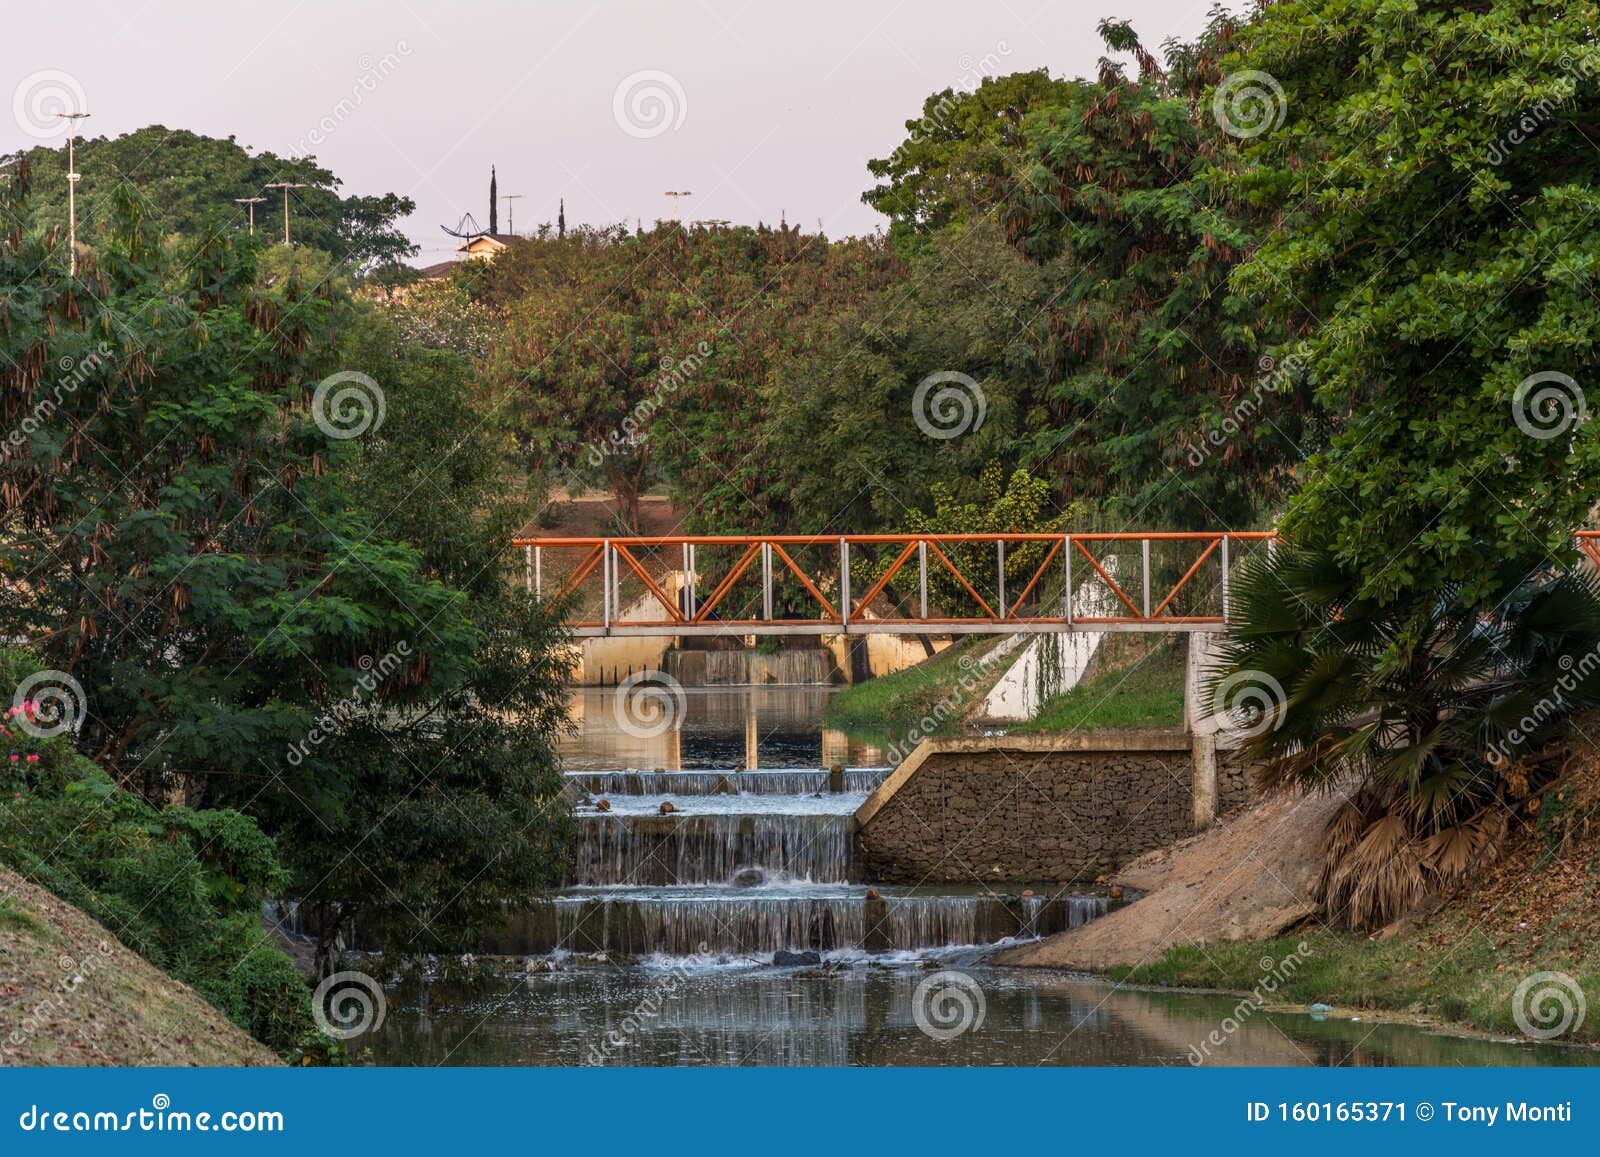 small waterfall along the river, in the ecological park, in indaiatuba, brazil